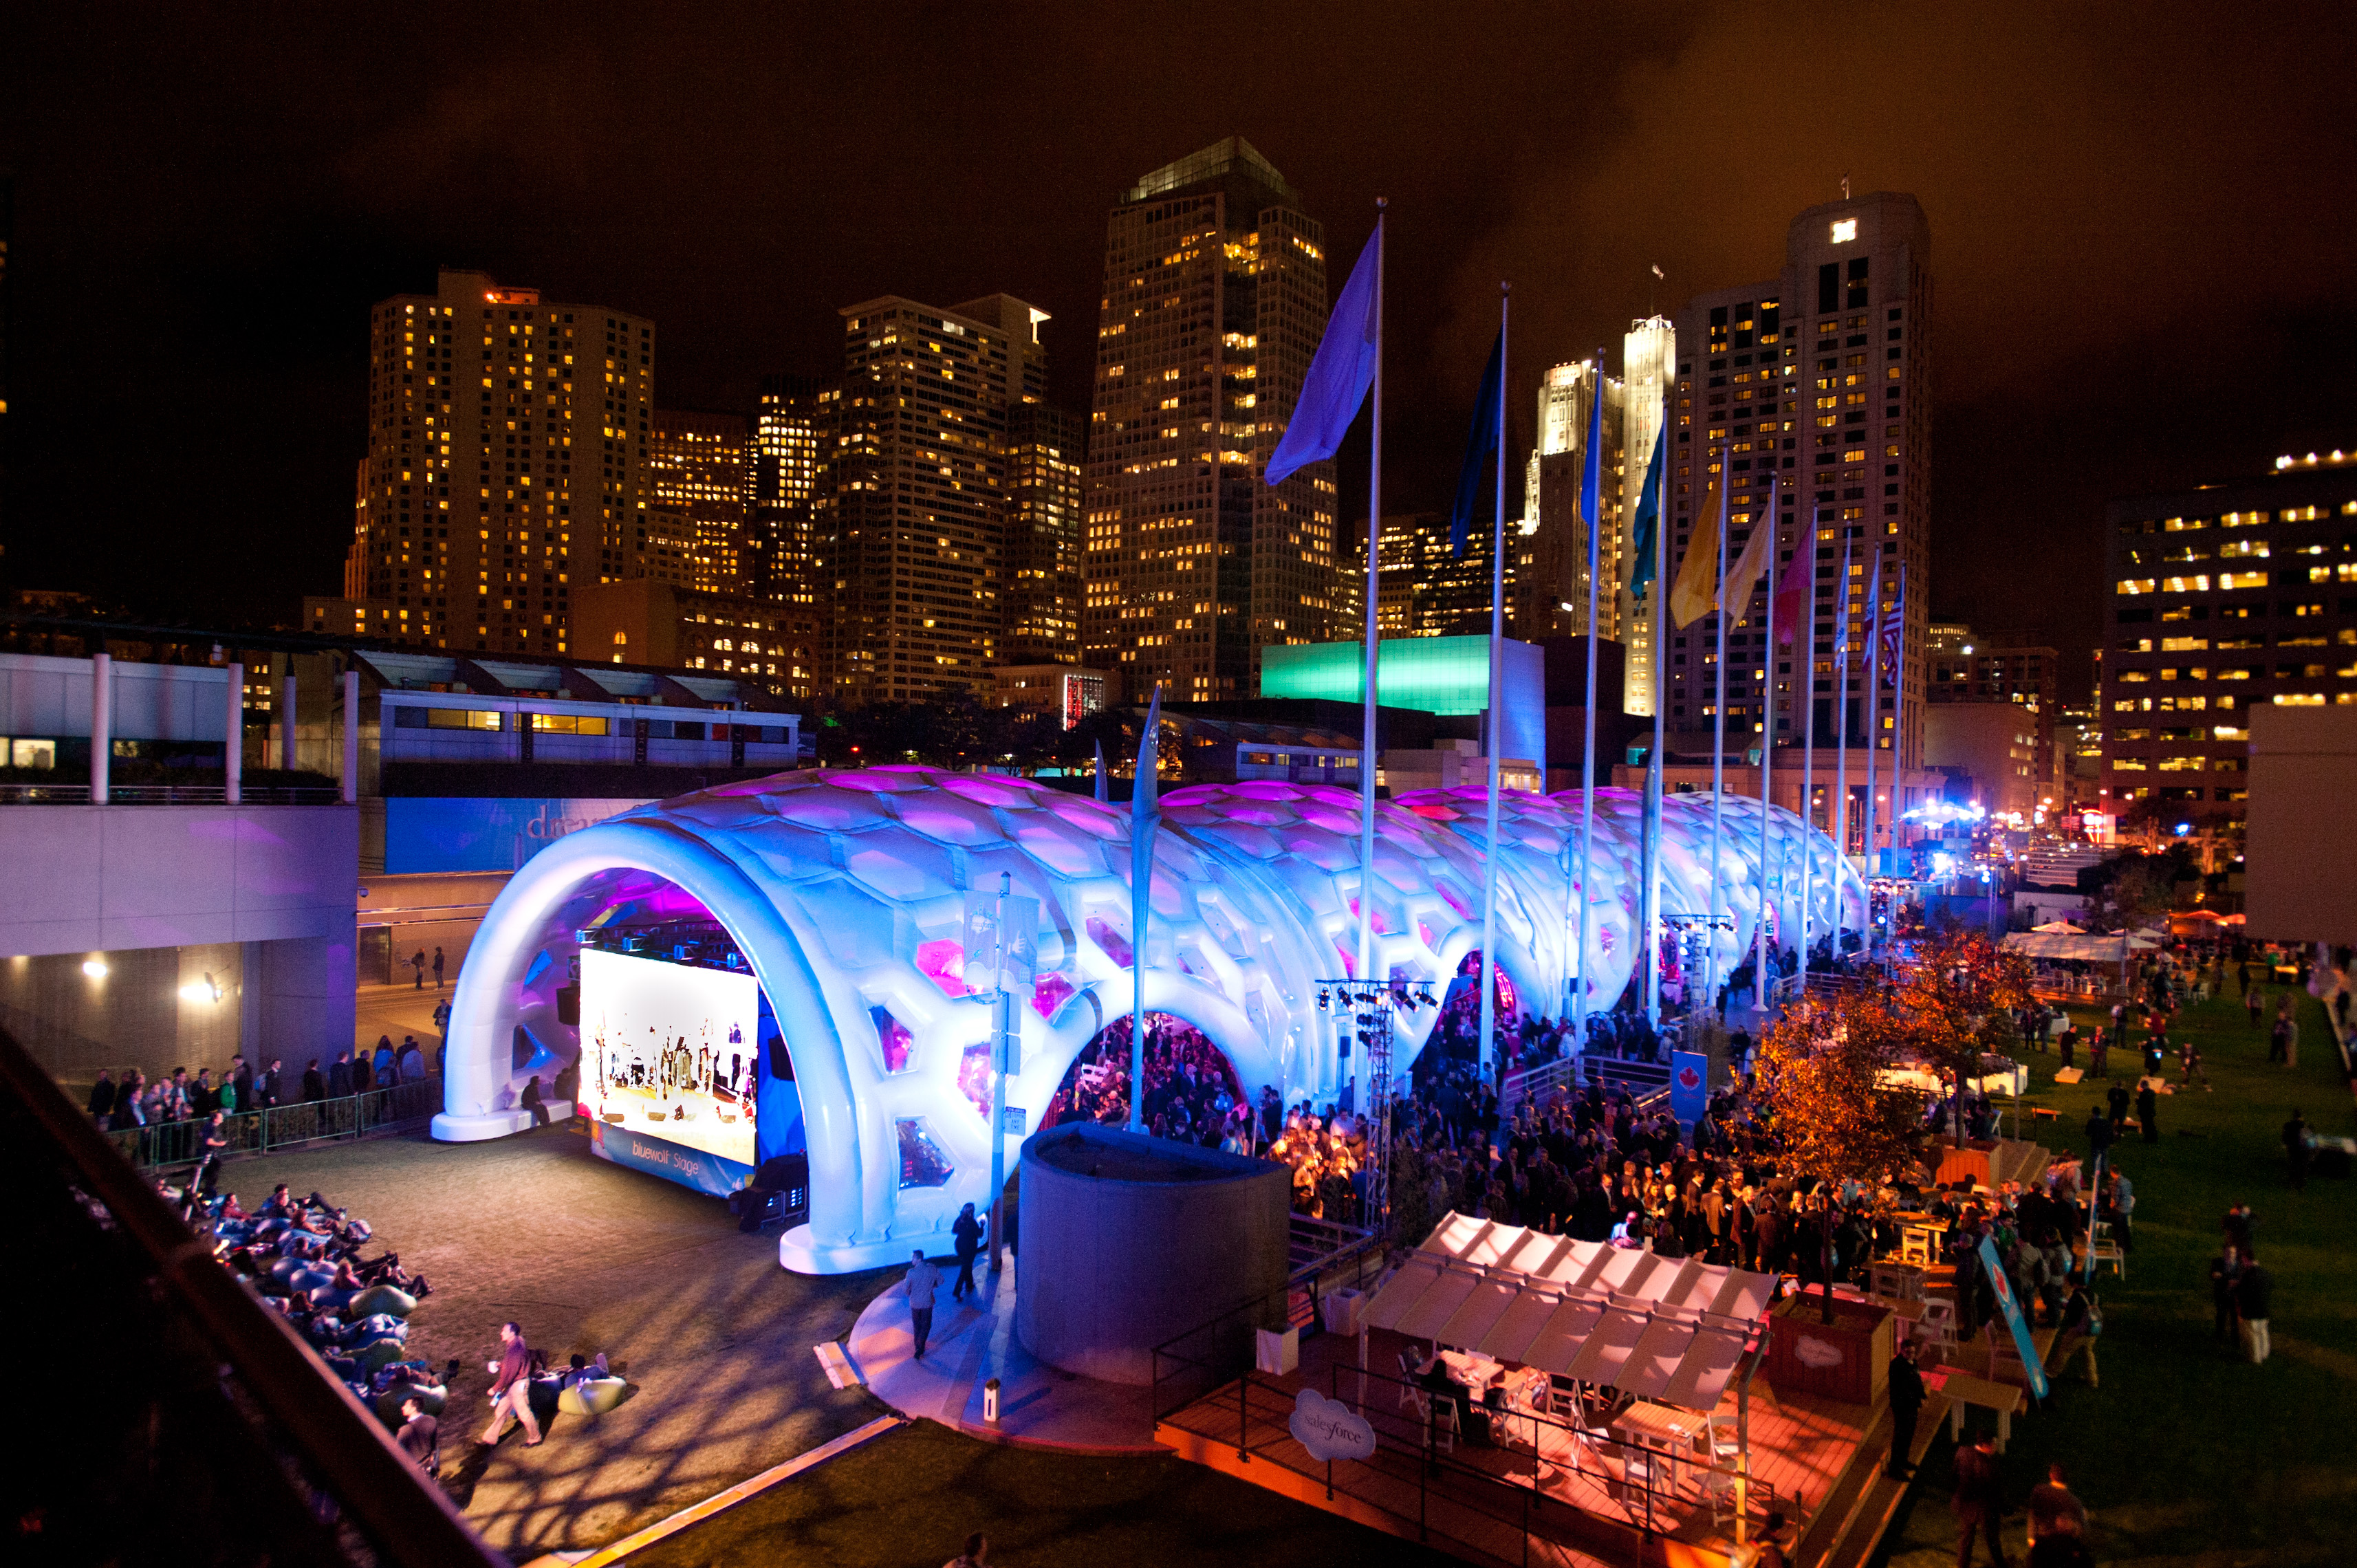 5 Lessons Learned From The MusicallyCharged Dreamforce 2013